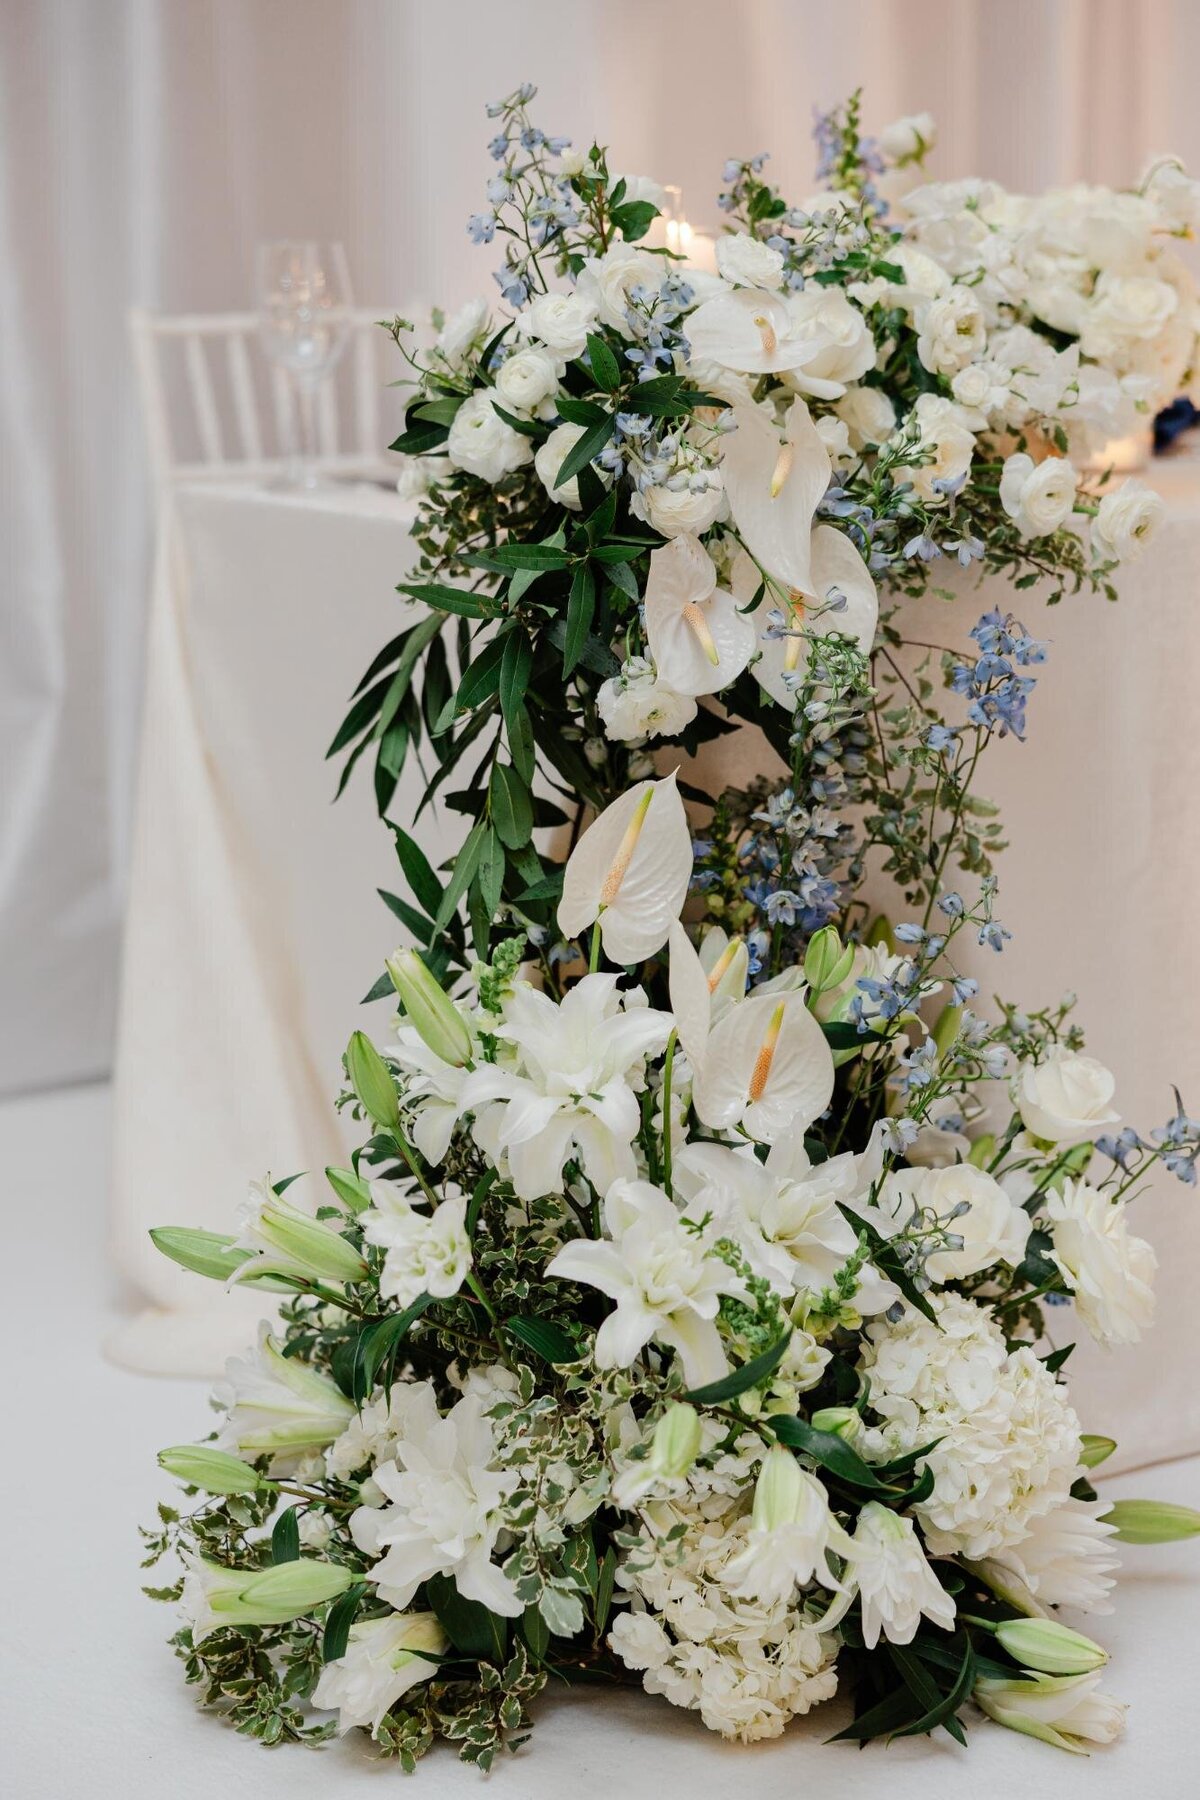 Elegant floral arrangement with white lilies, hydrangeas, and other greenery on a draped table at an event.